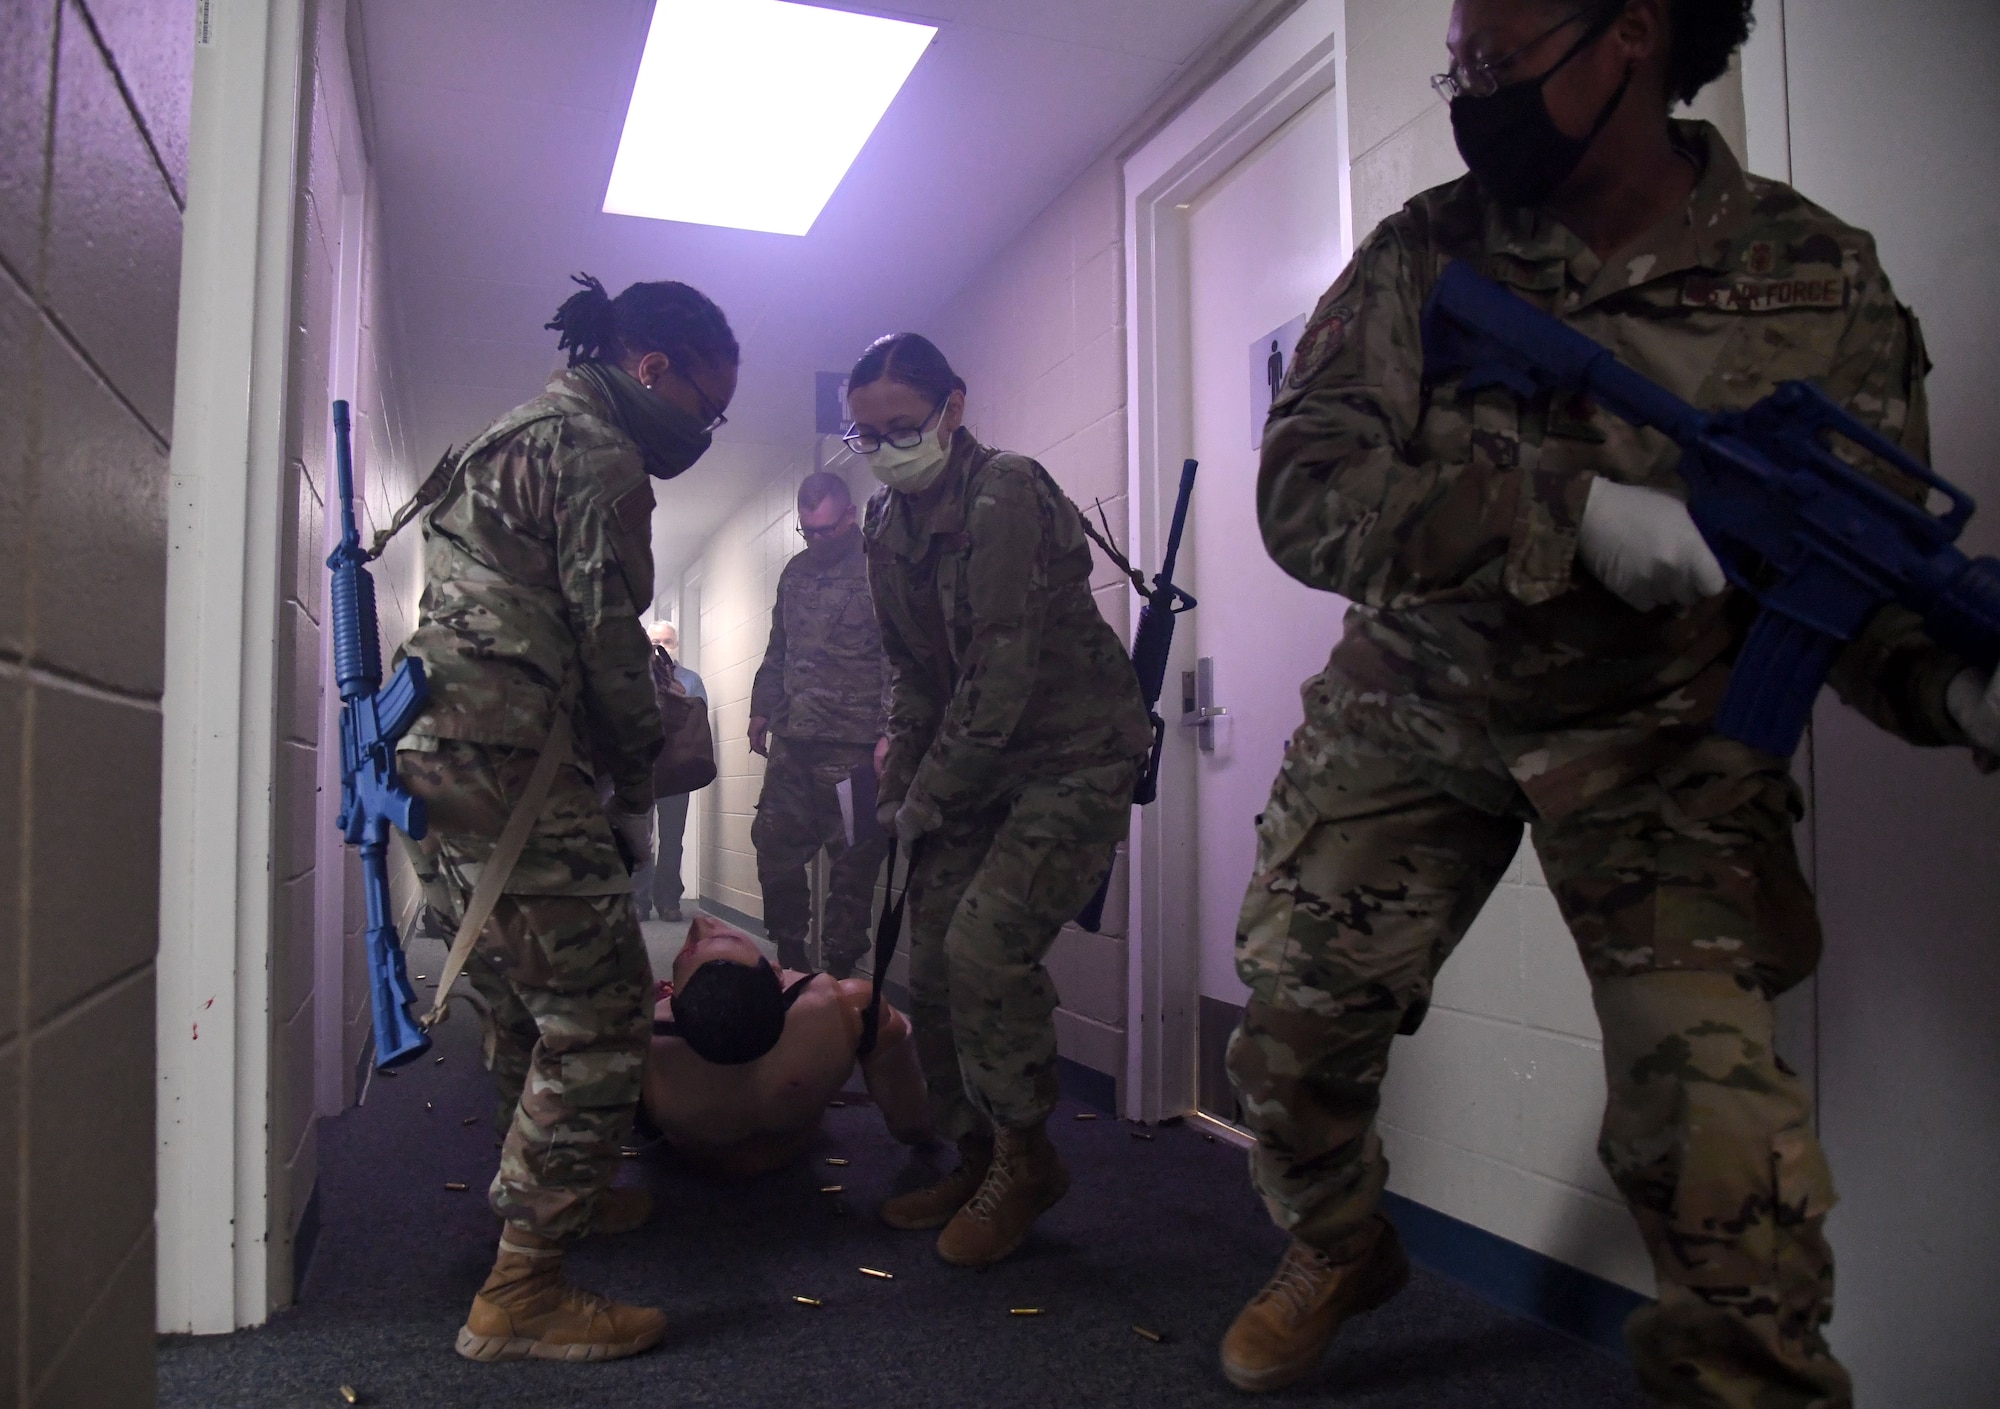 Dragon medics participate in the Tactical Combat Casualty Care training program inside the Locker House at Keesler Air Force Base, Mississippi, March 30, 2021. The training offers hands-on training in a simulated deployed environment using evidence based, life saving techniques and strategies to provide the best trauma care possible on the battlefield. (U.S. Air Force photo by Kemberly Groue)